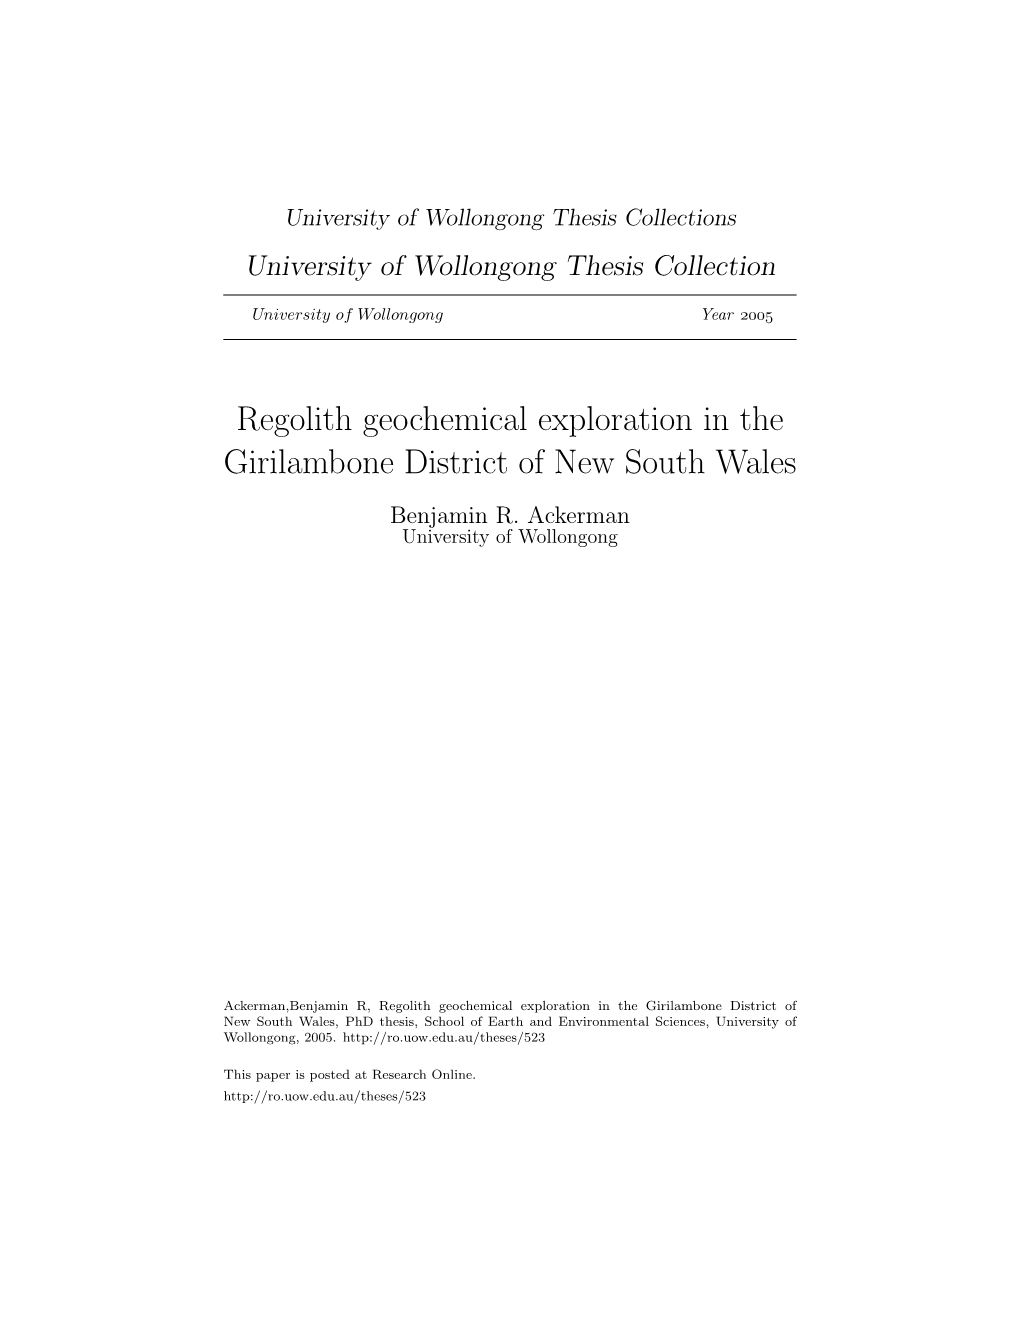 Regolith Geochemical Exploration in the Girilambone District of New South Wales Benjamin R